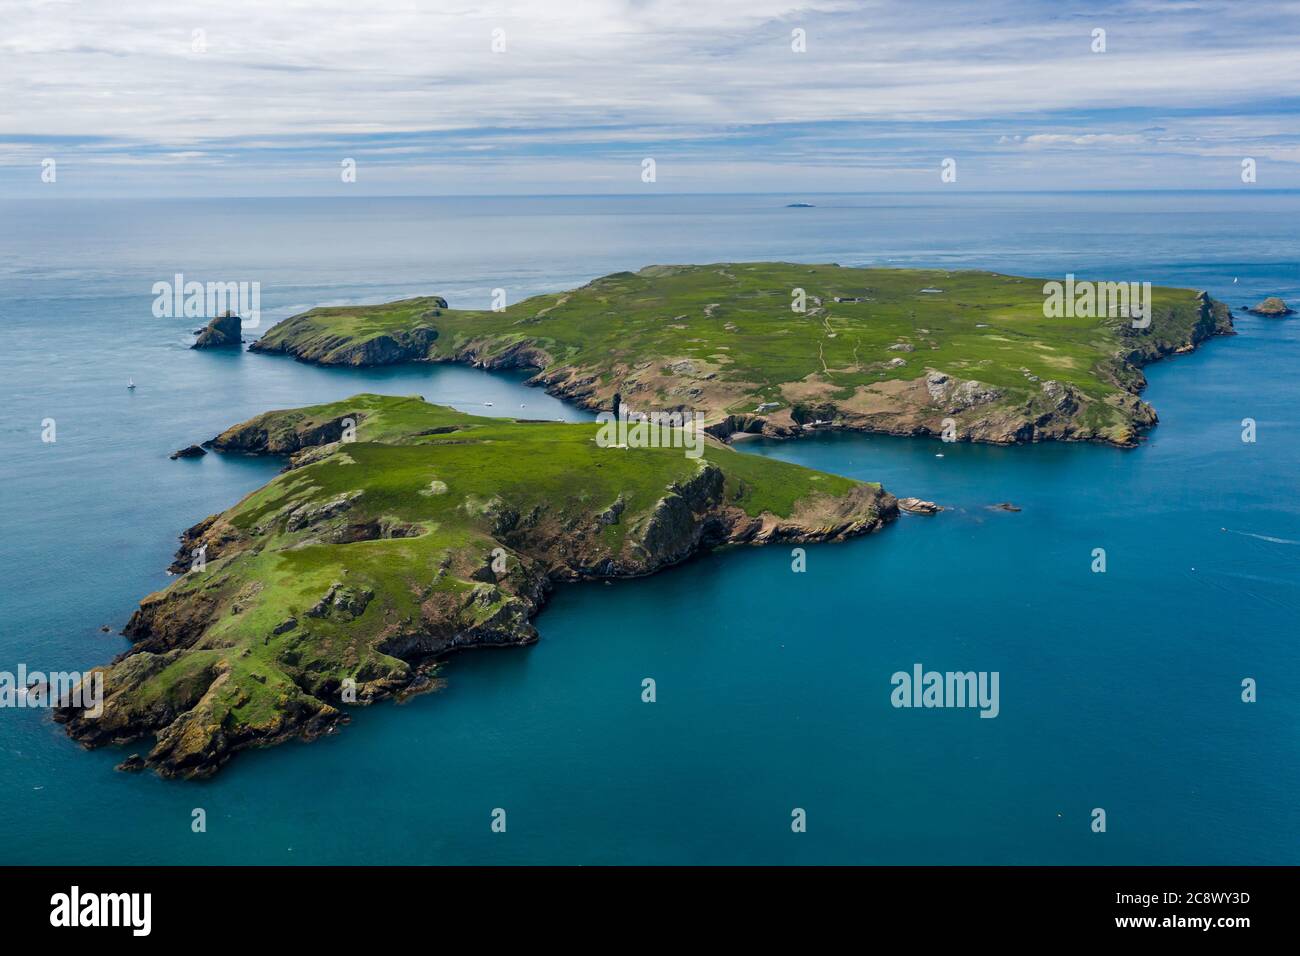 Aerial view of Skomer Island off the West Wales coast, UK Stock Photo